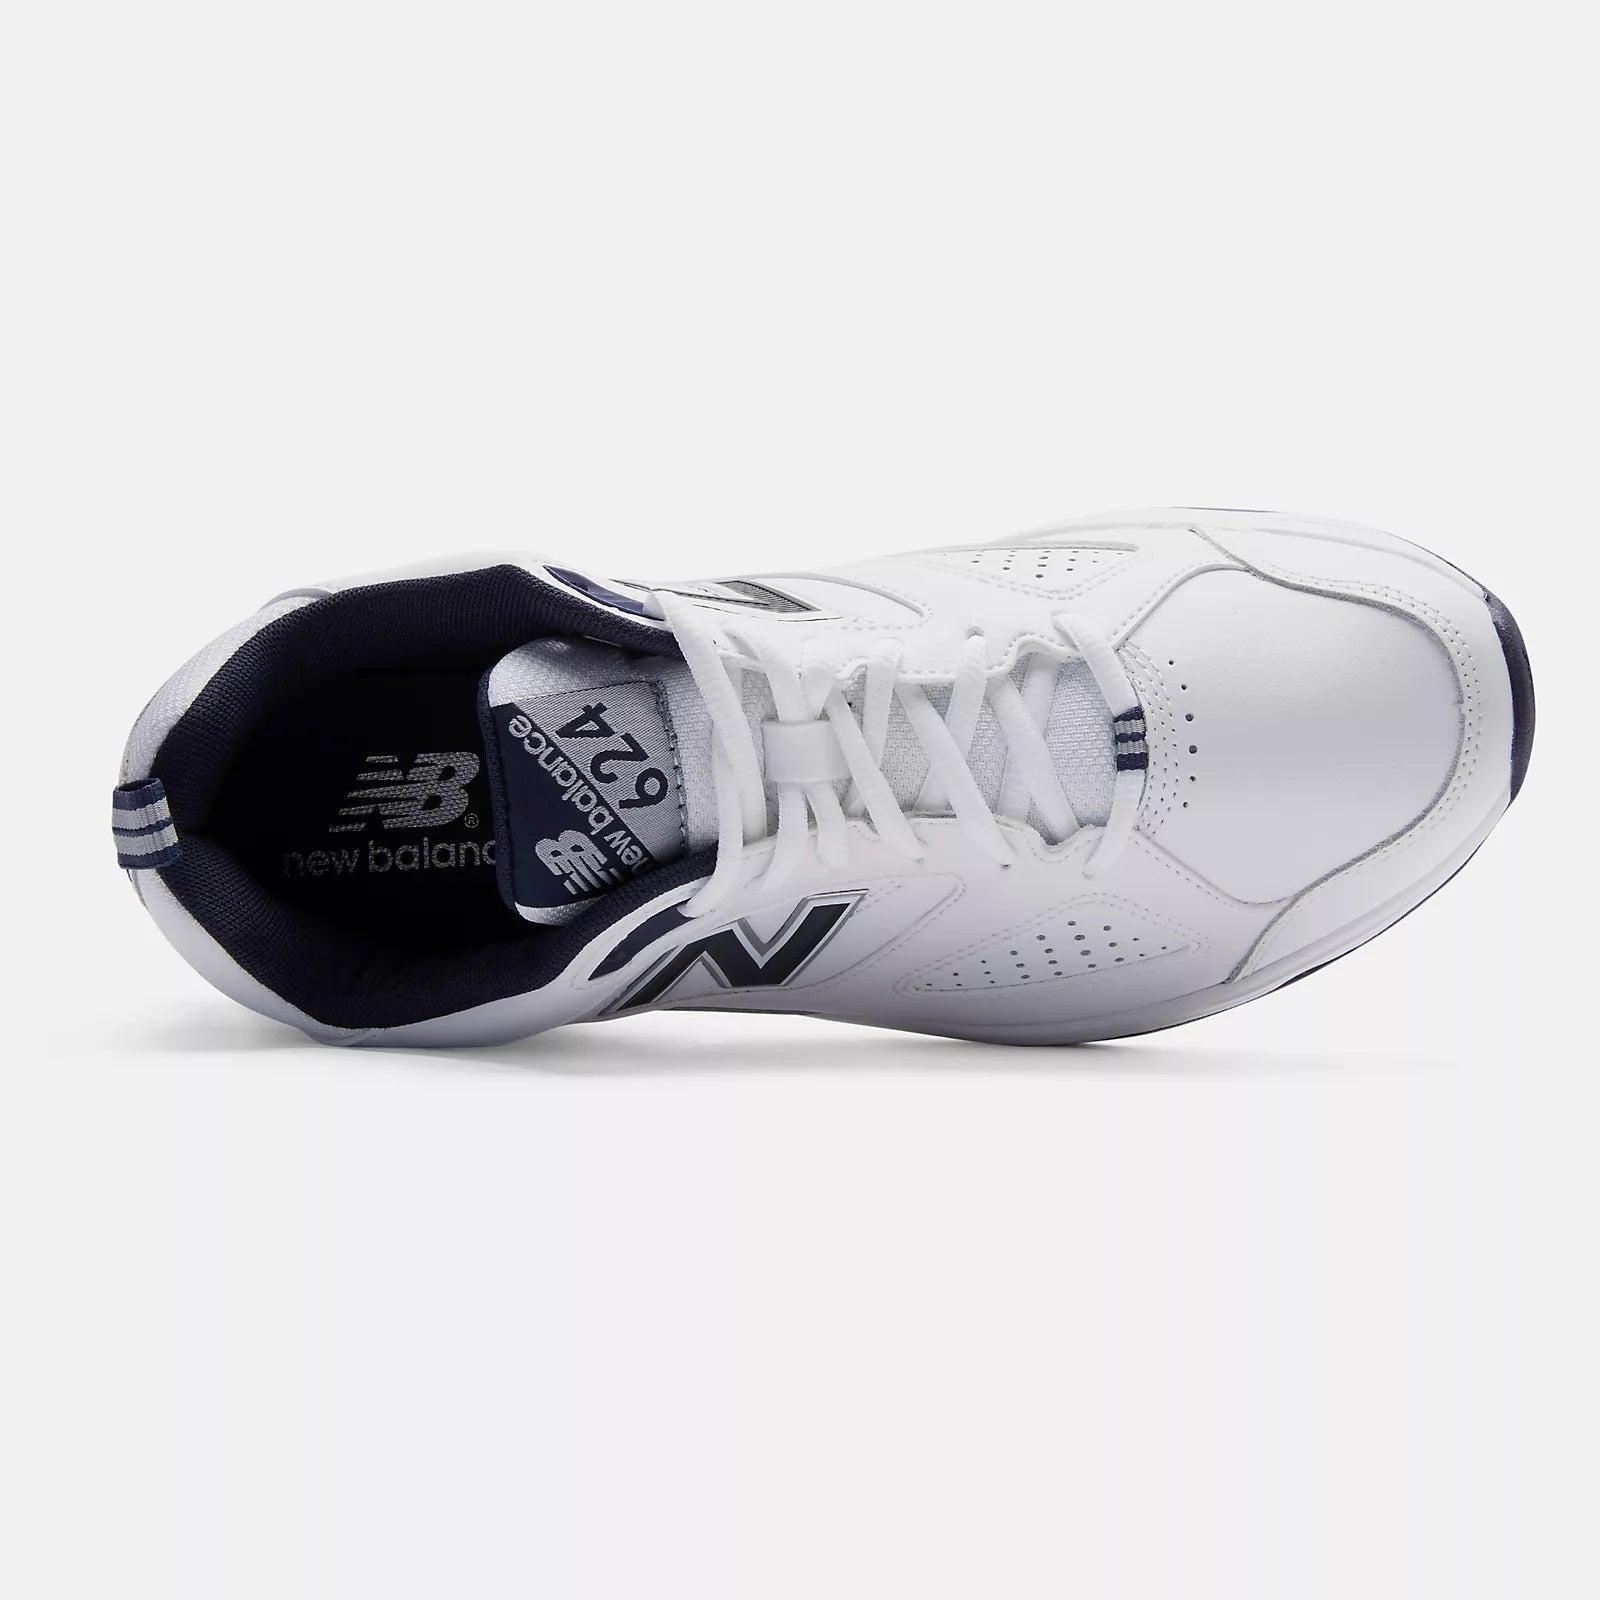 New Balance Rubber S Wide Fit Mx624wn4 Trainers in White | Lyst